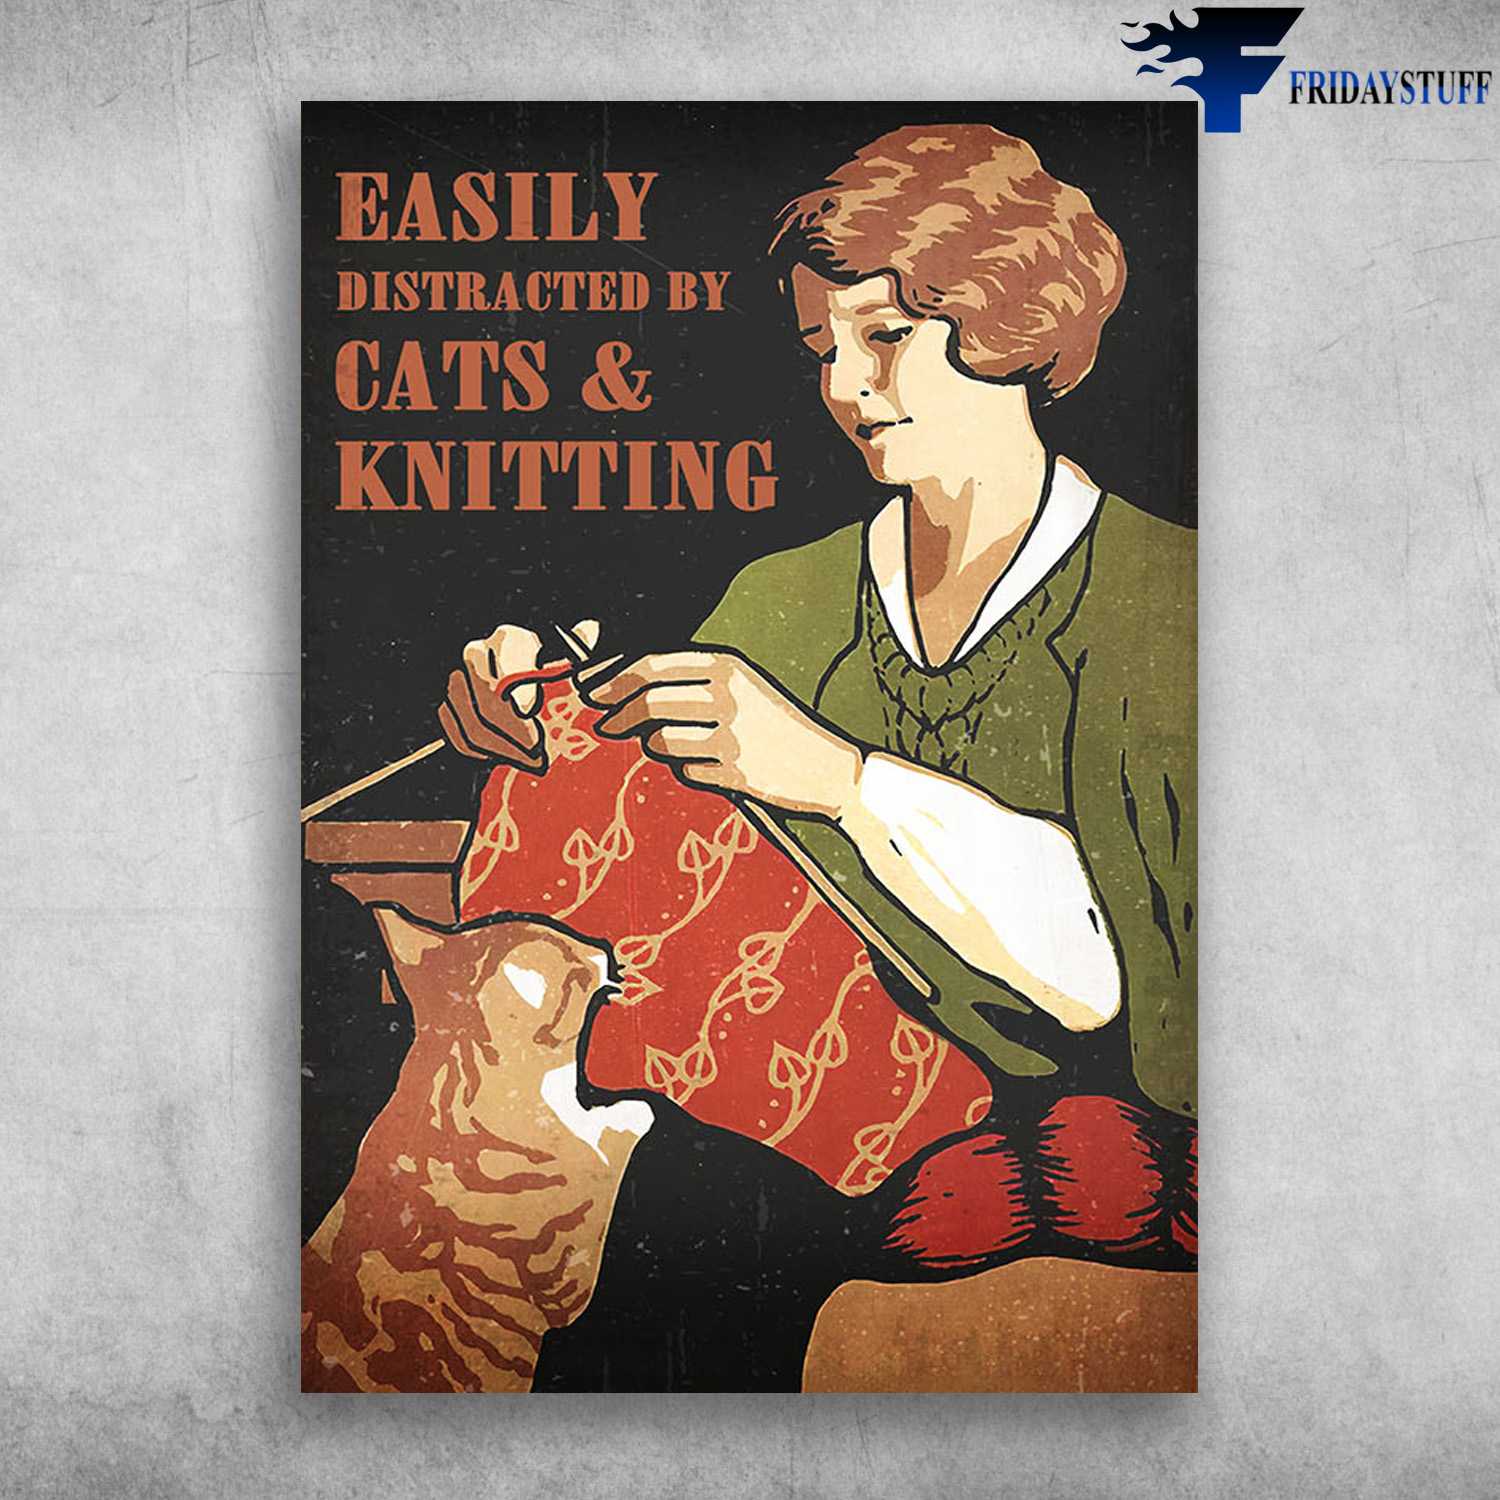 Knitting Girl, Cat Lover - Easily Distracted By, Cats And Knitting